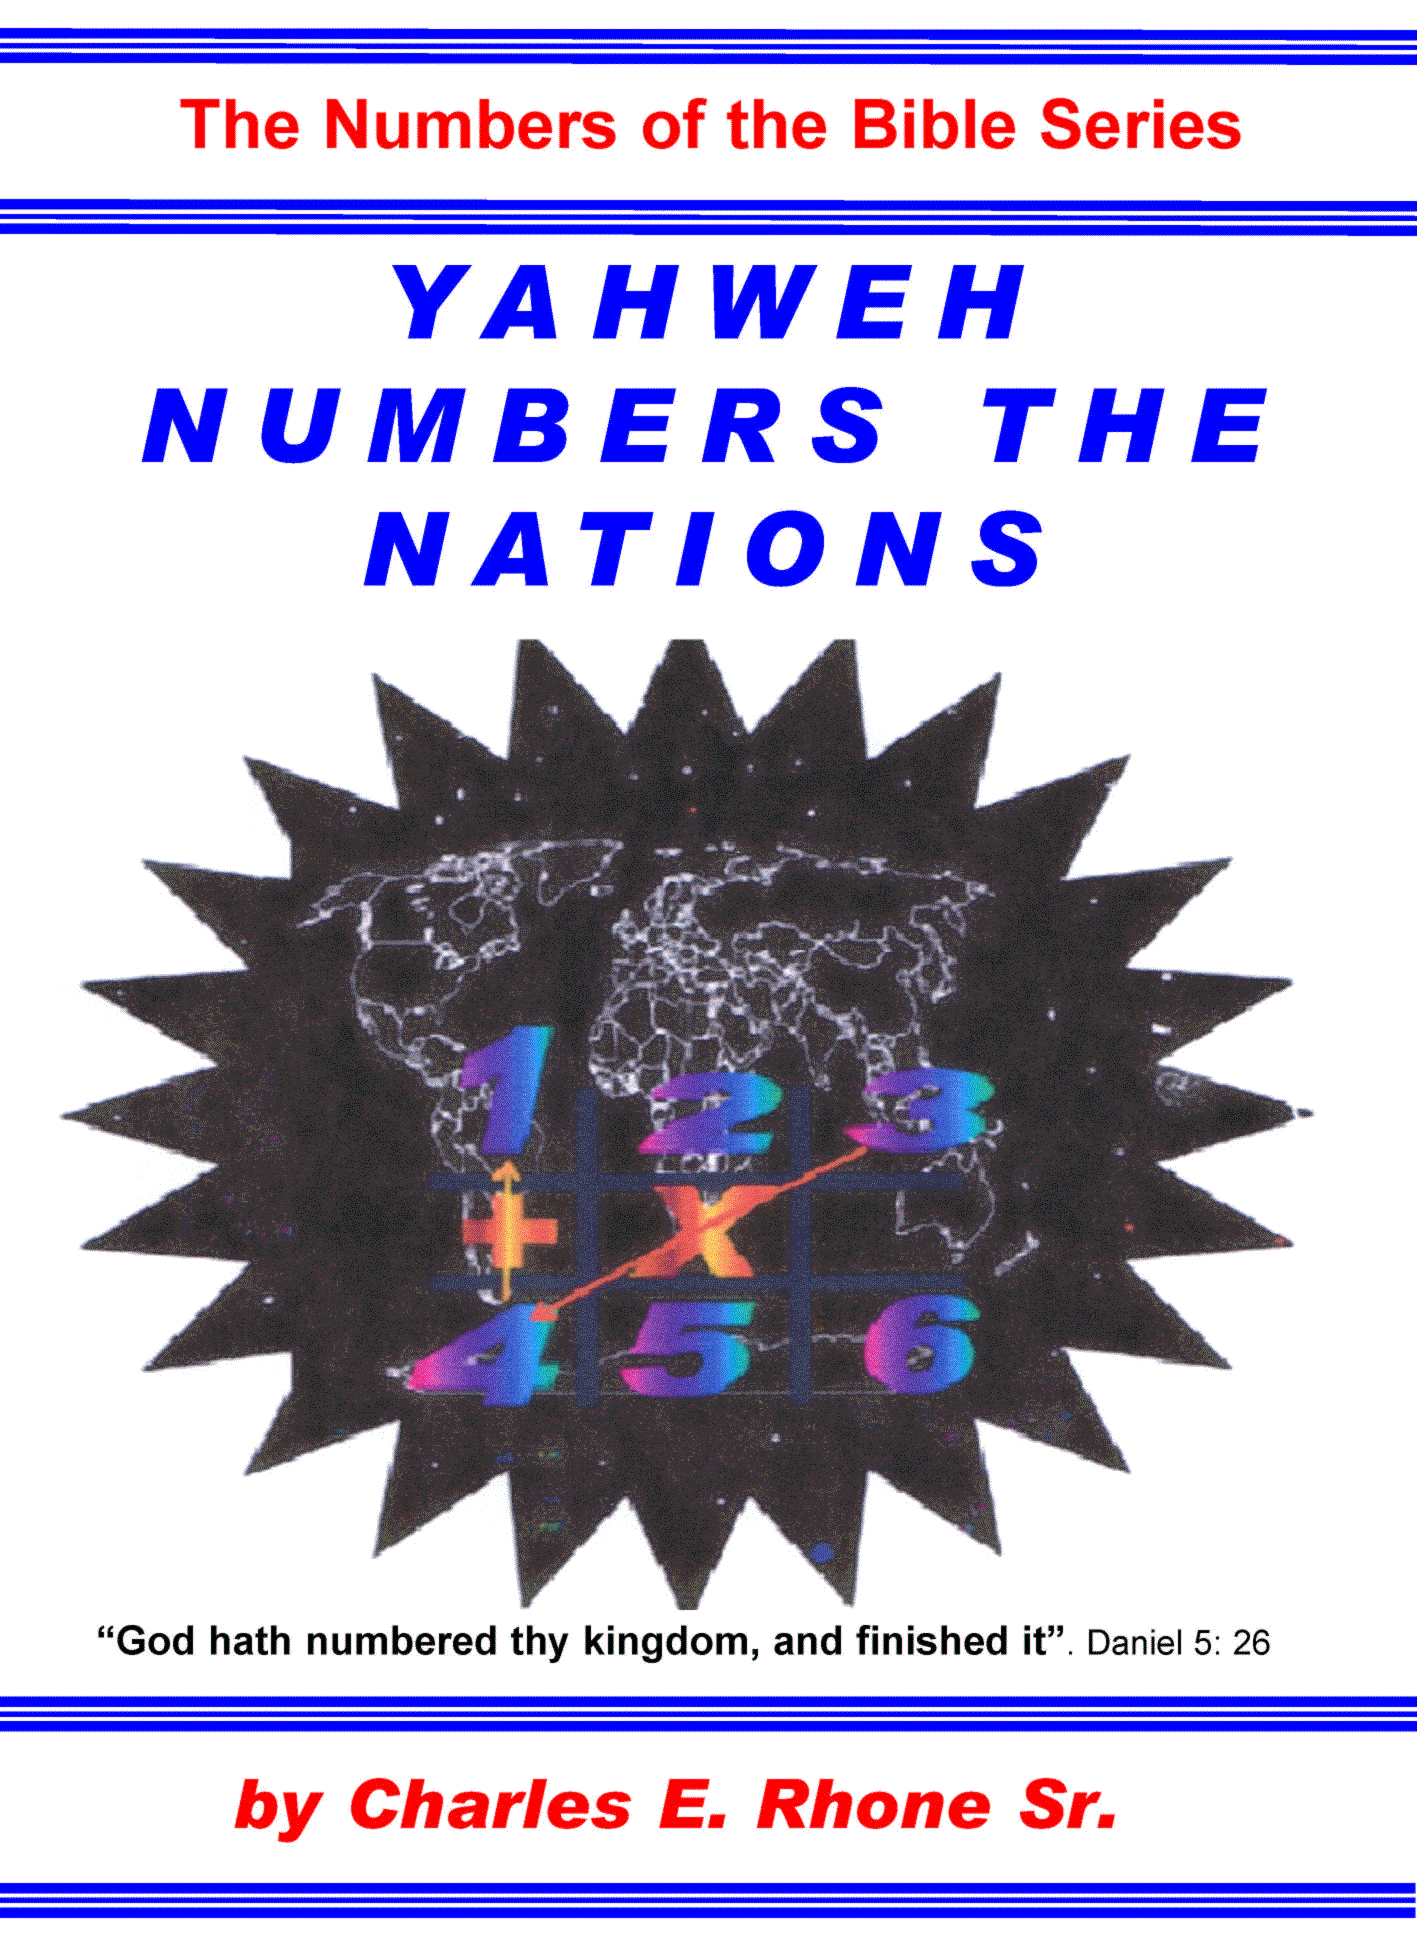 Yahweh Numbers the Nations